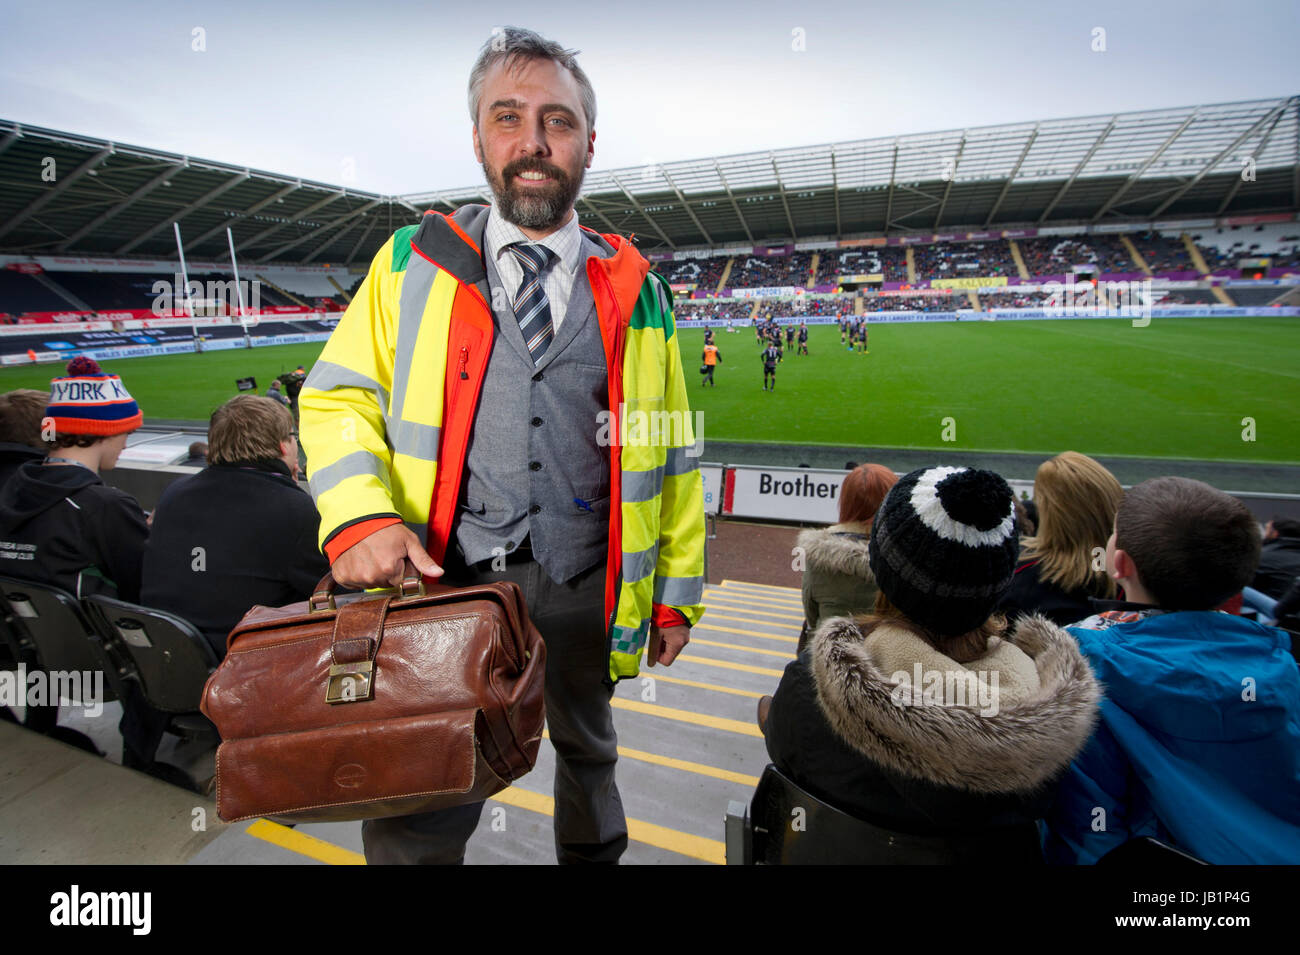 Dr.Russell Clark, a general practitioner who works as a duty doctor at rugby matches at the Liberty Stadium, Swansea, Wales. Stock Photo